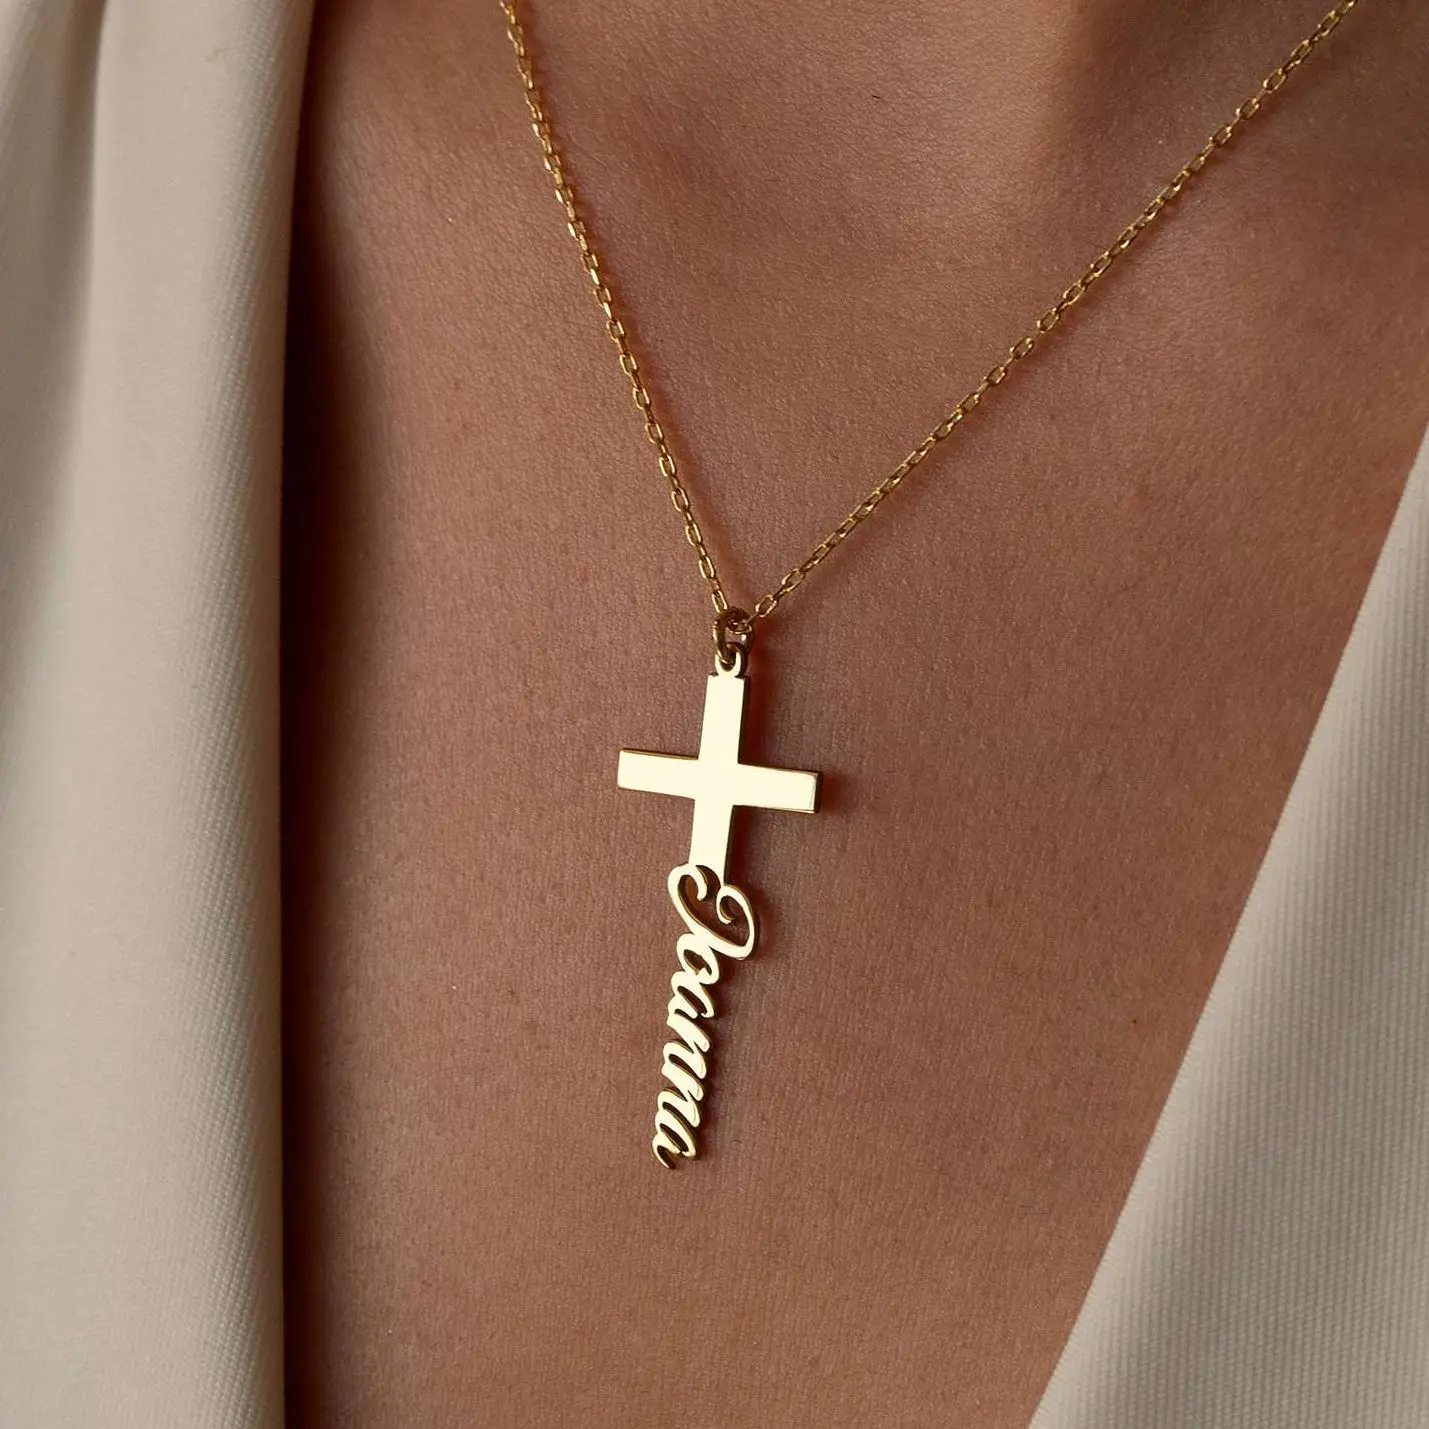 Personalized Cross Necklace with Name Stainless Steel Custom Name Pendant Cross Necklace Gift for Friend